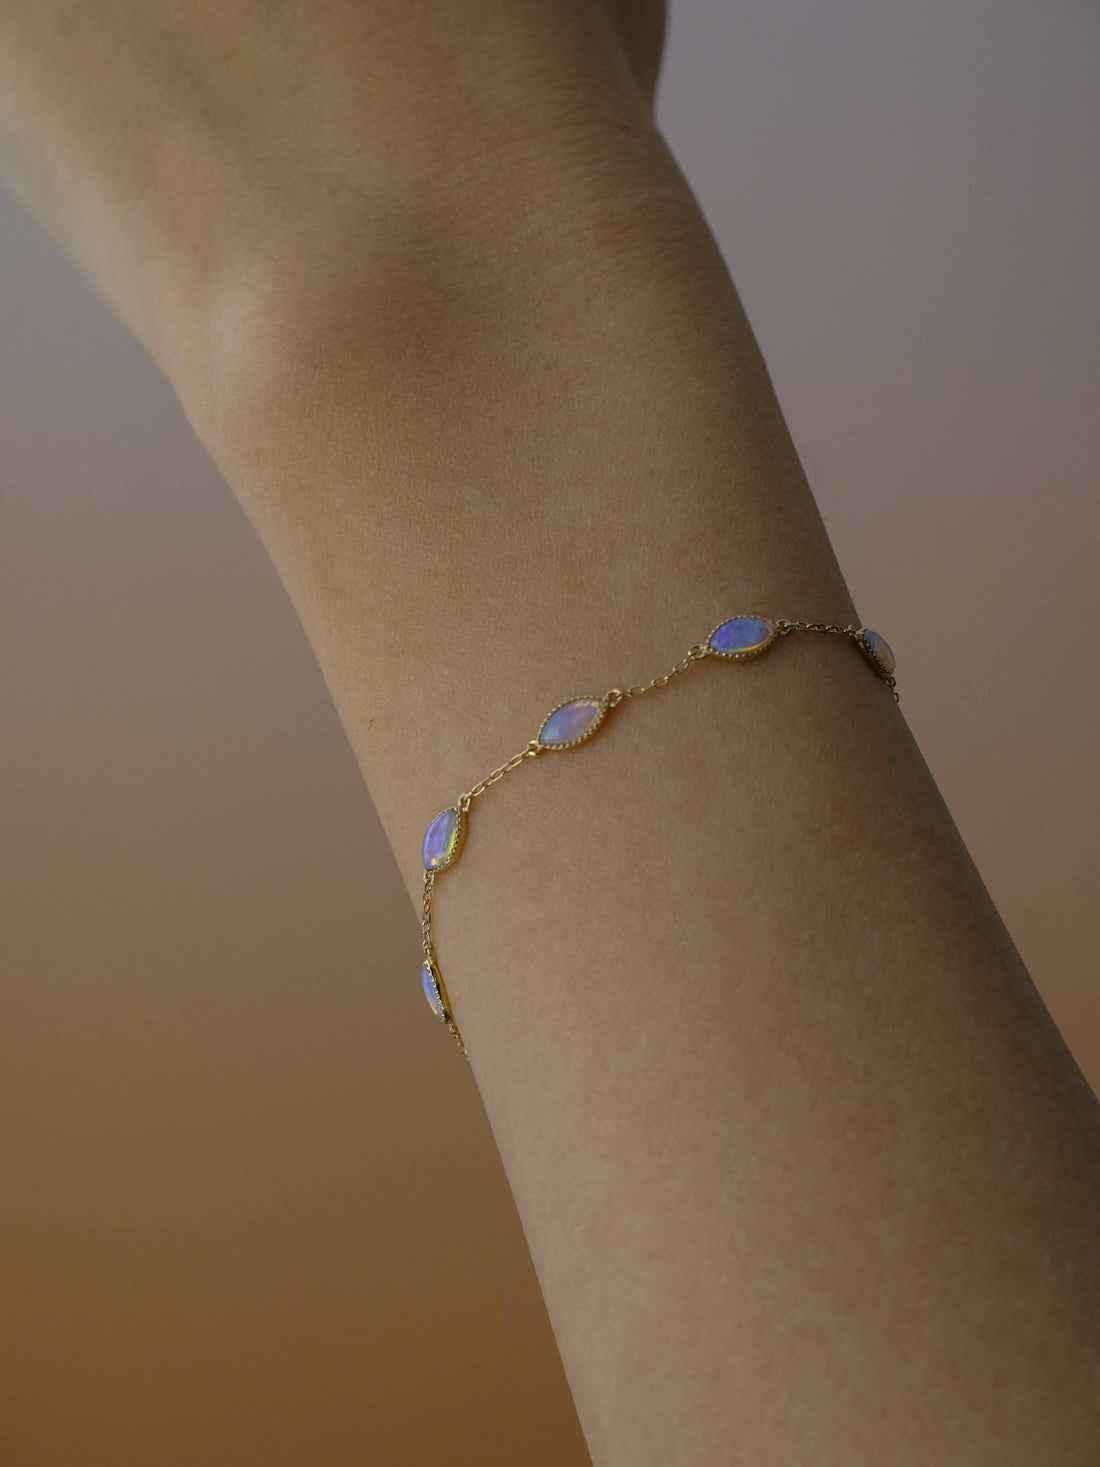 Marquise Opal Chain Bracelet, 18k solid gold